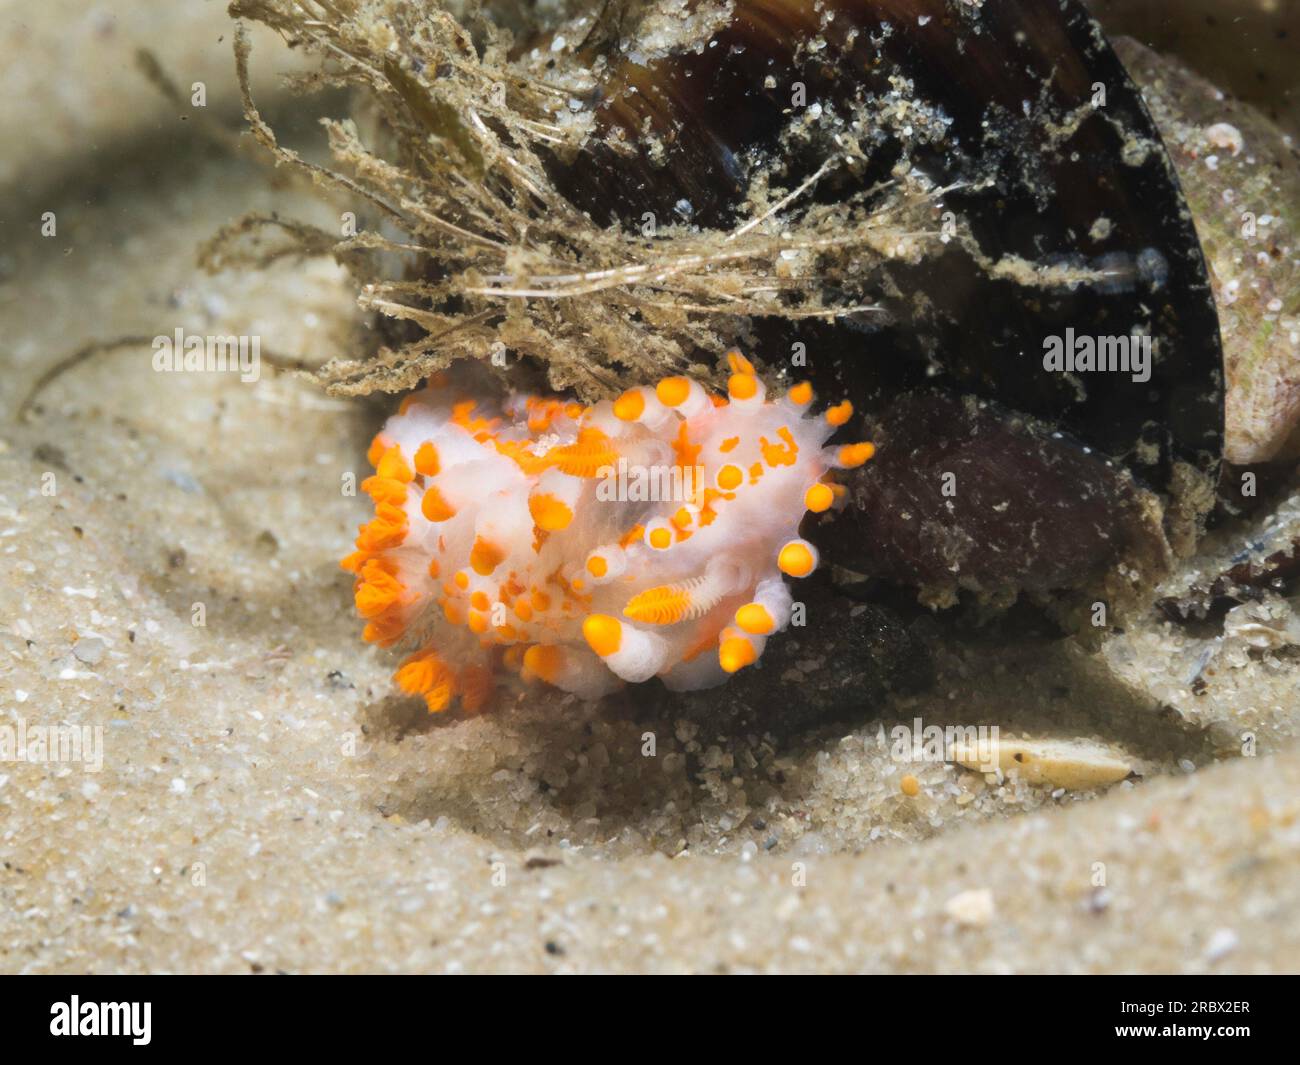 Orange-clubbed sea slug (Limacia clavigera) front view of a white bodied nudibranch with orange tips on protrusions and blotches Stock Photo